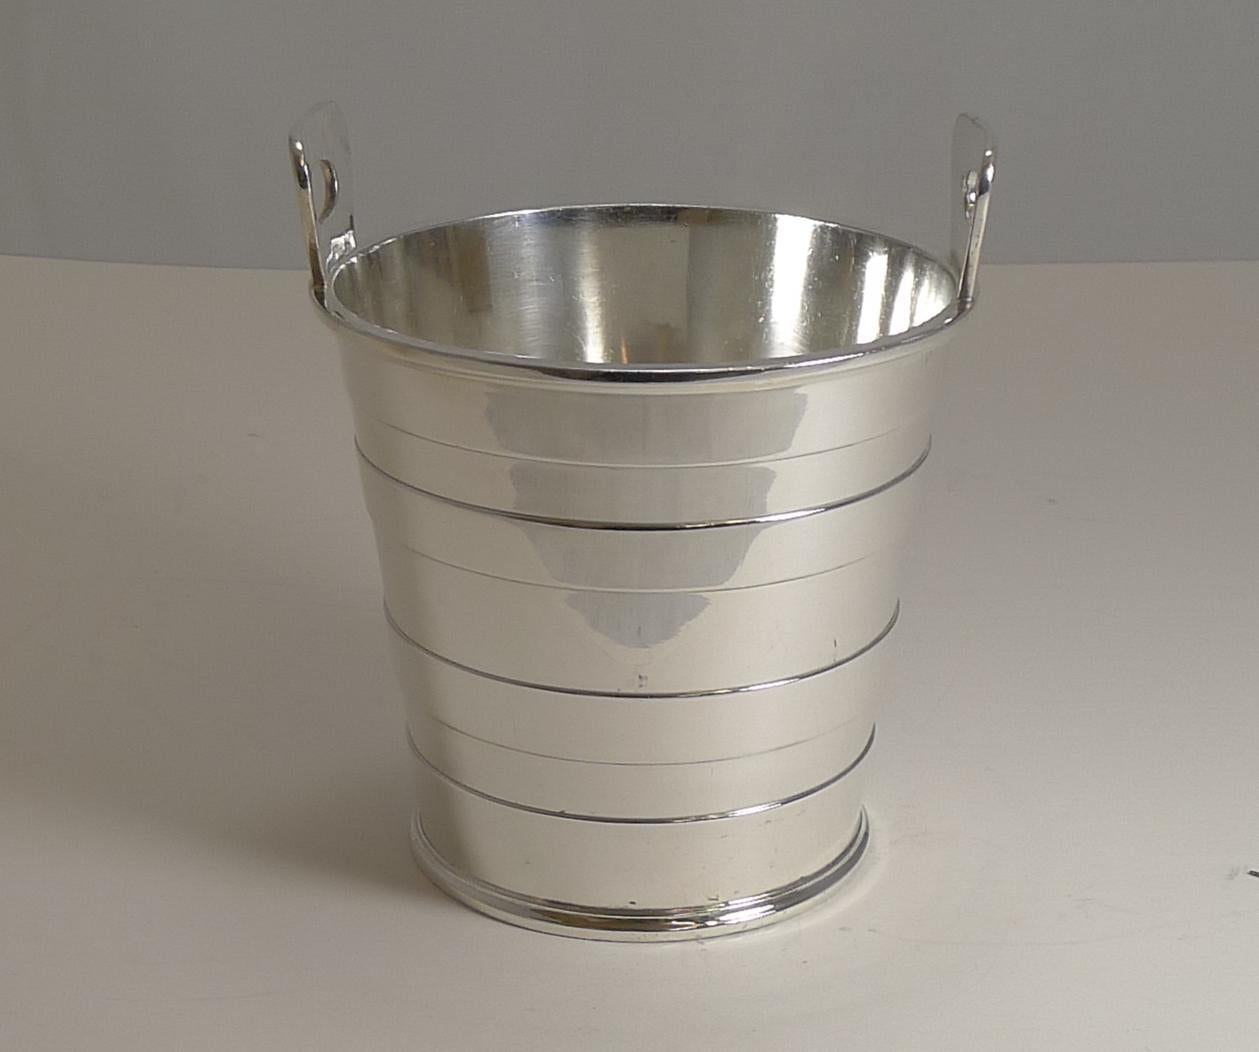 Early 20th Century Silver Plated Ice Bucket by Mappin and Webb, New Zealand Shipping Co.